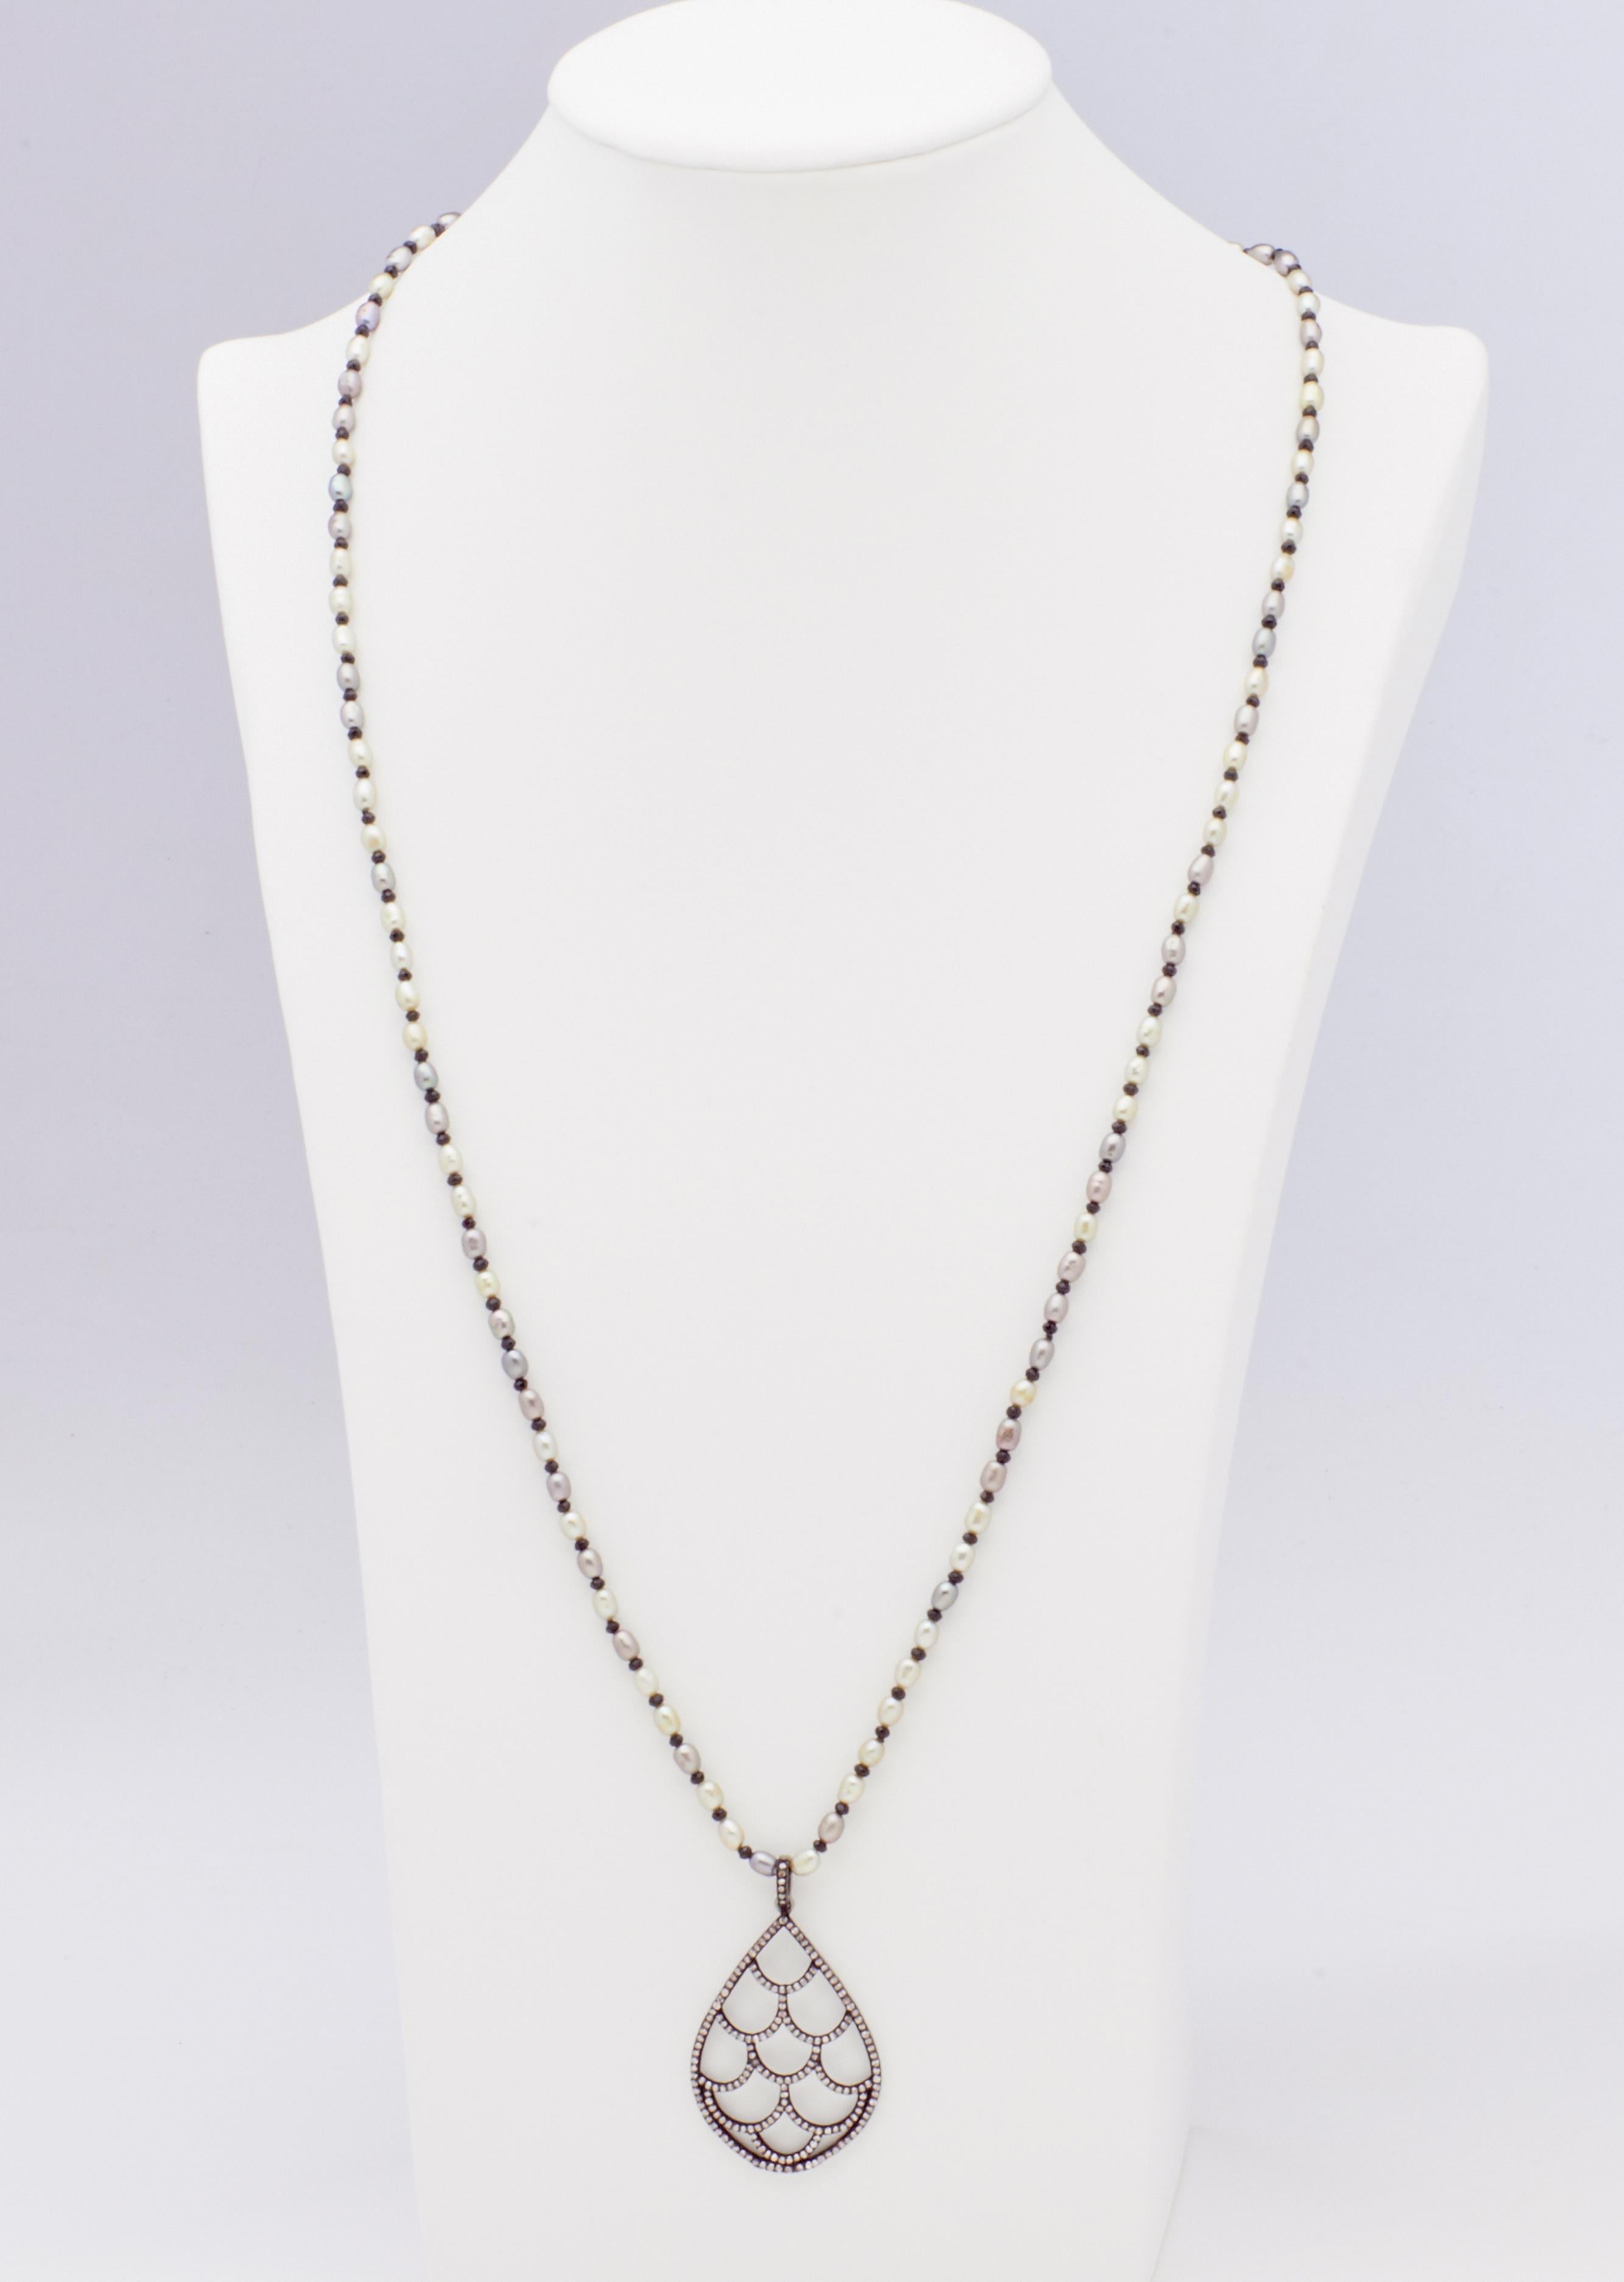 A cascading sterling silver tear drop pendant charm glistening with diamonds suspended on a 26 inch necklace strand of  3.5mm light gray Akoya button pearls offset by 2.5mm natural spinel beads to create a light fresh look perfect to display on a